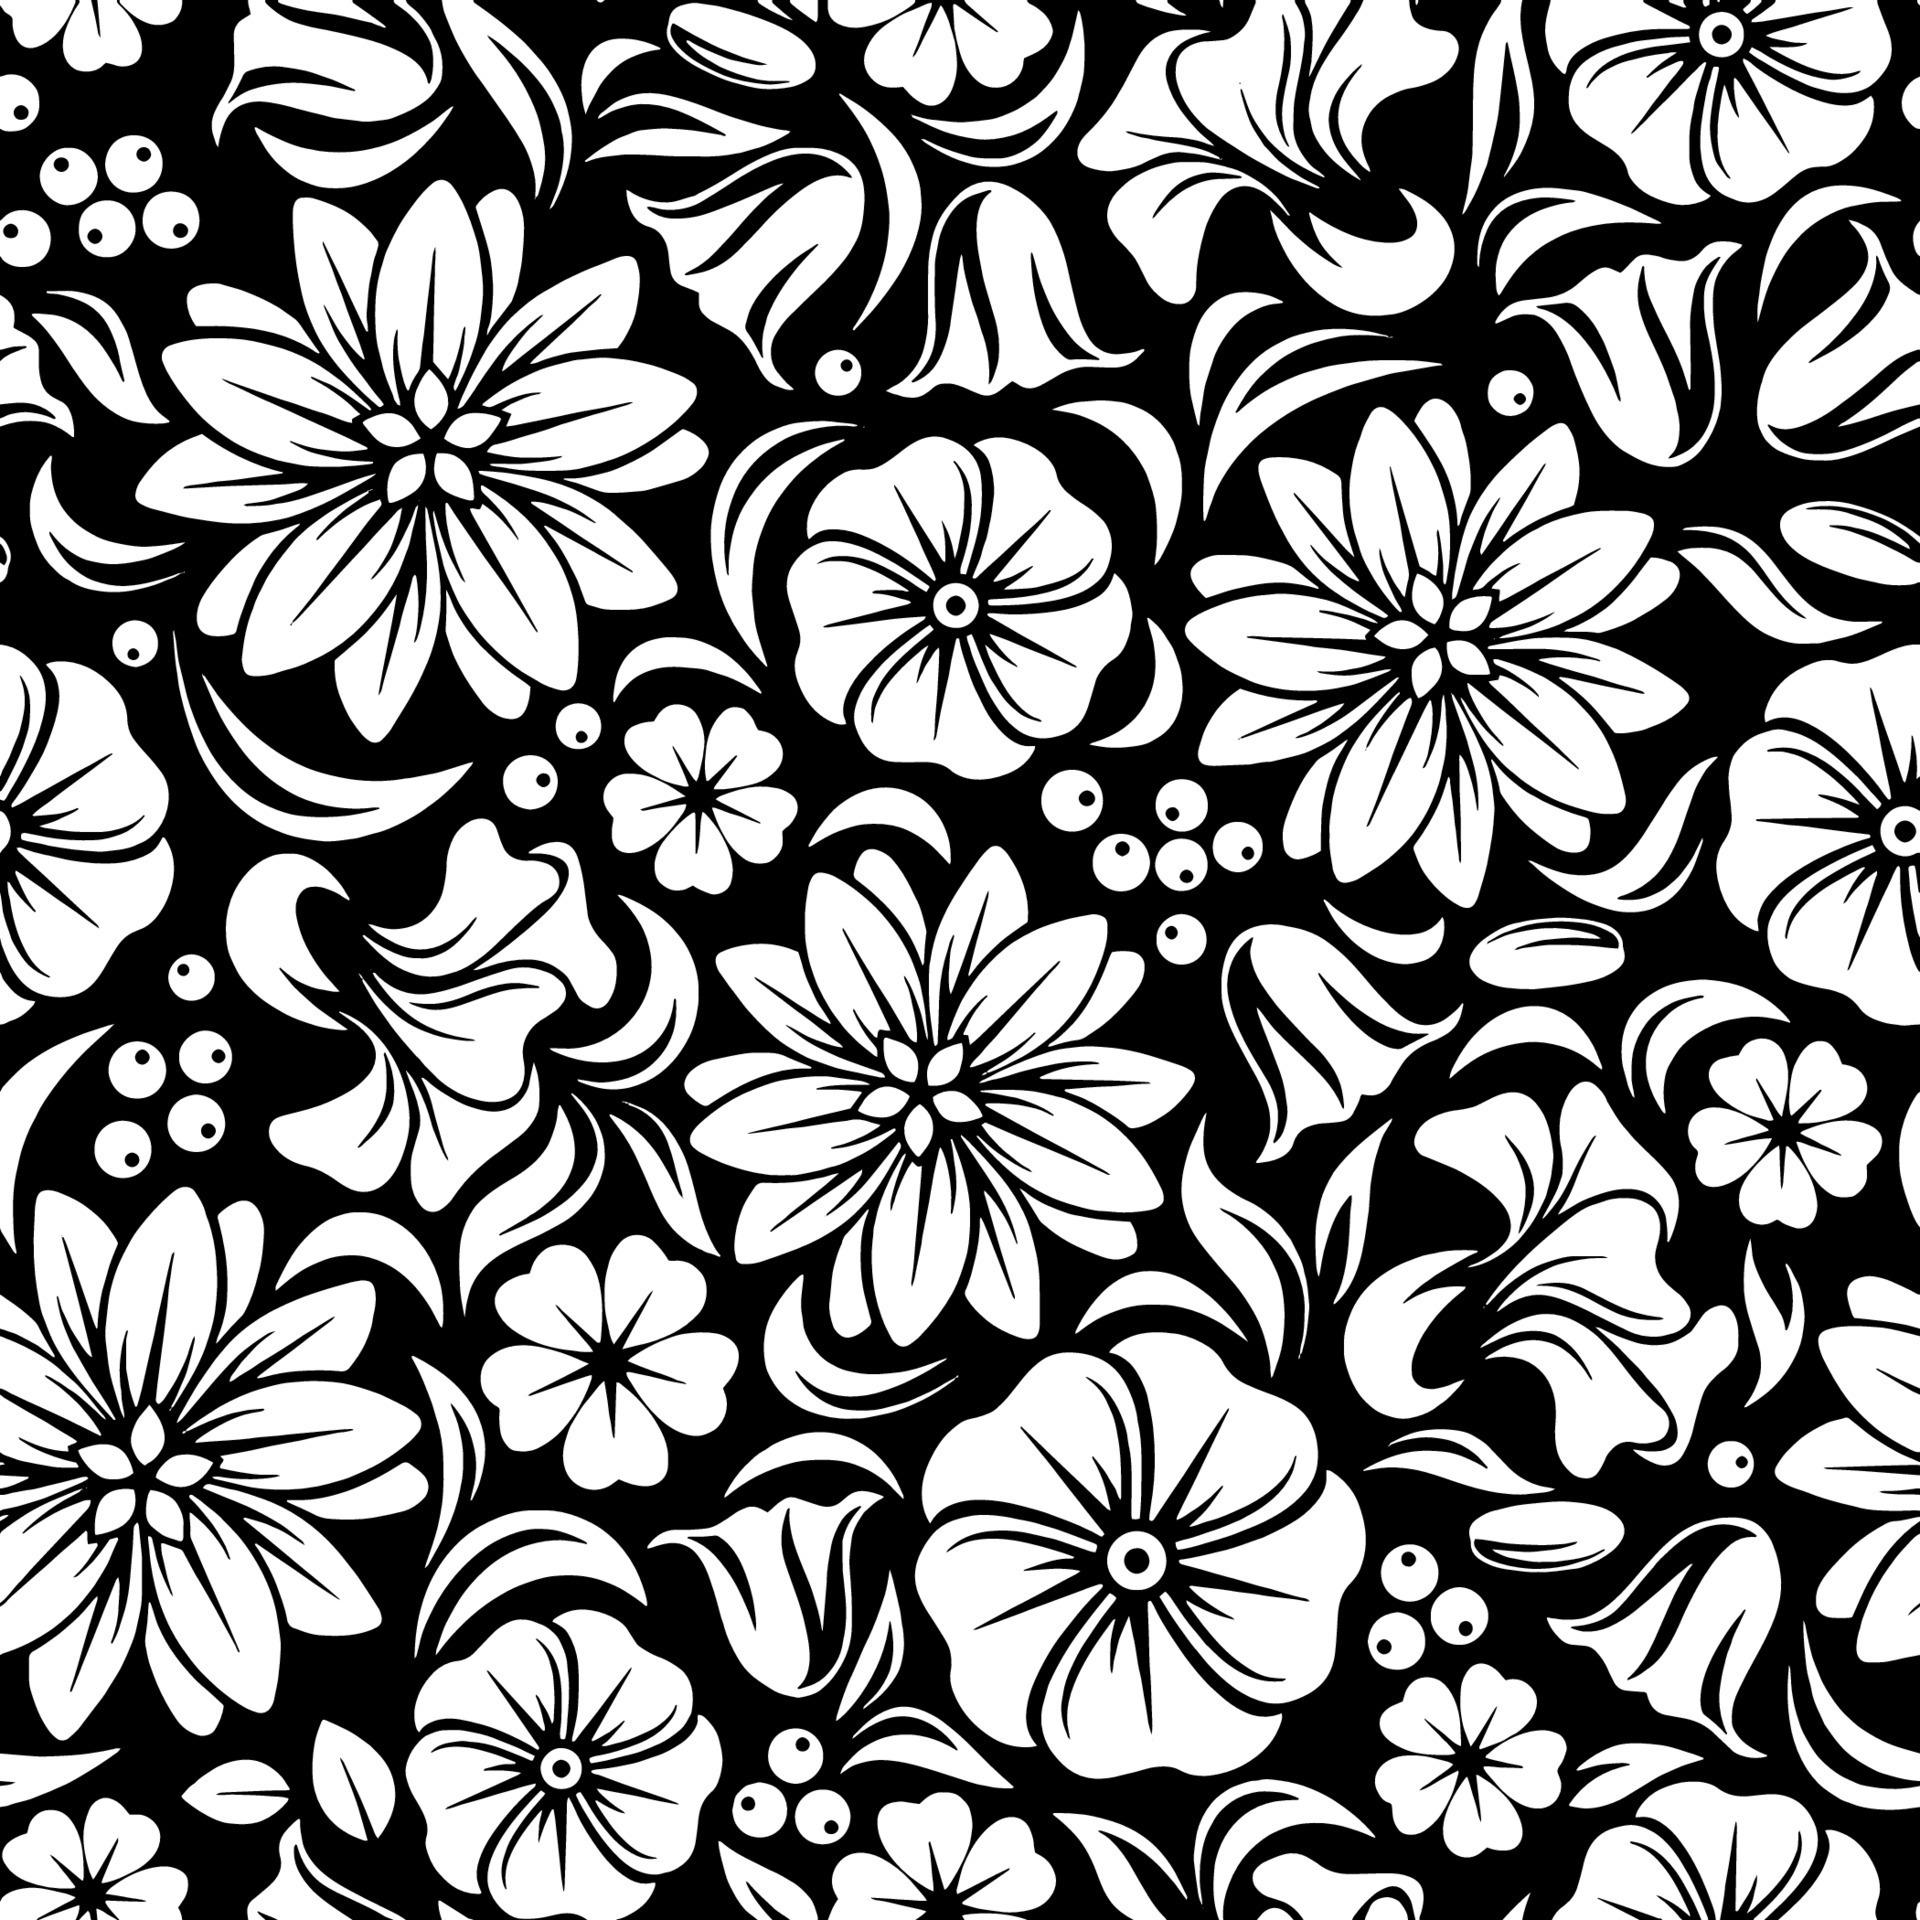 Discover more than 65 black background floral wallpaper best - in ...